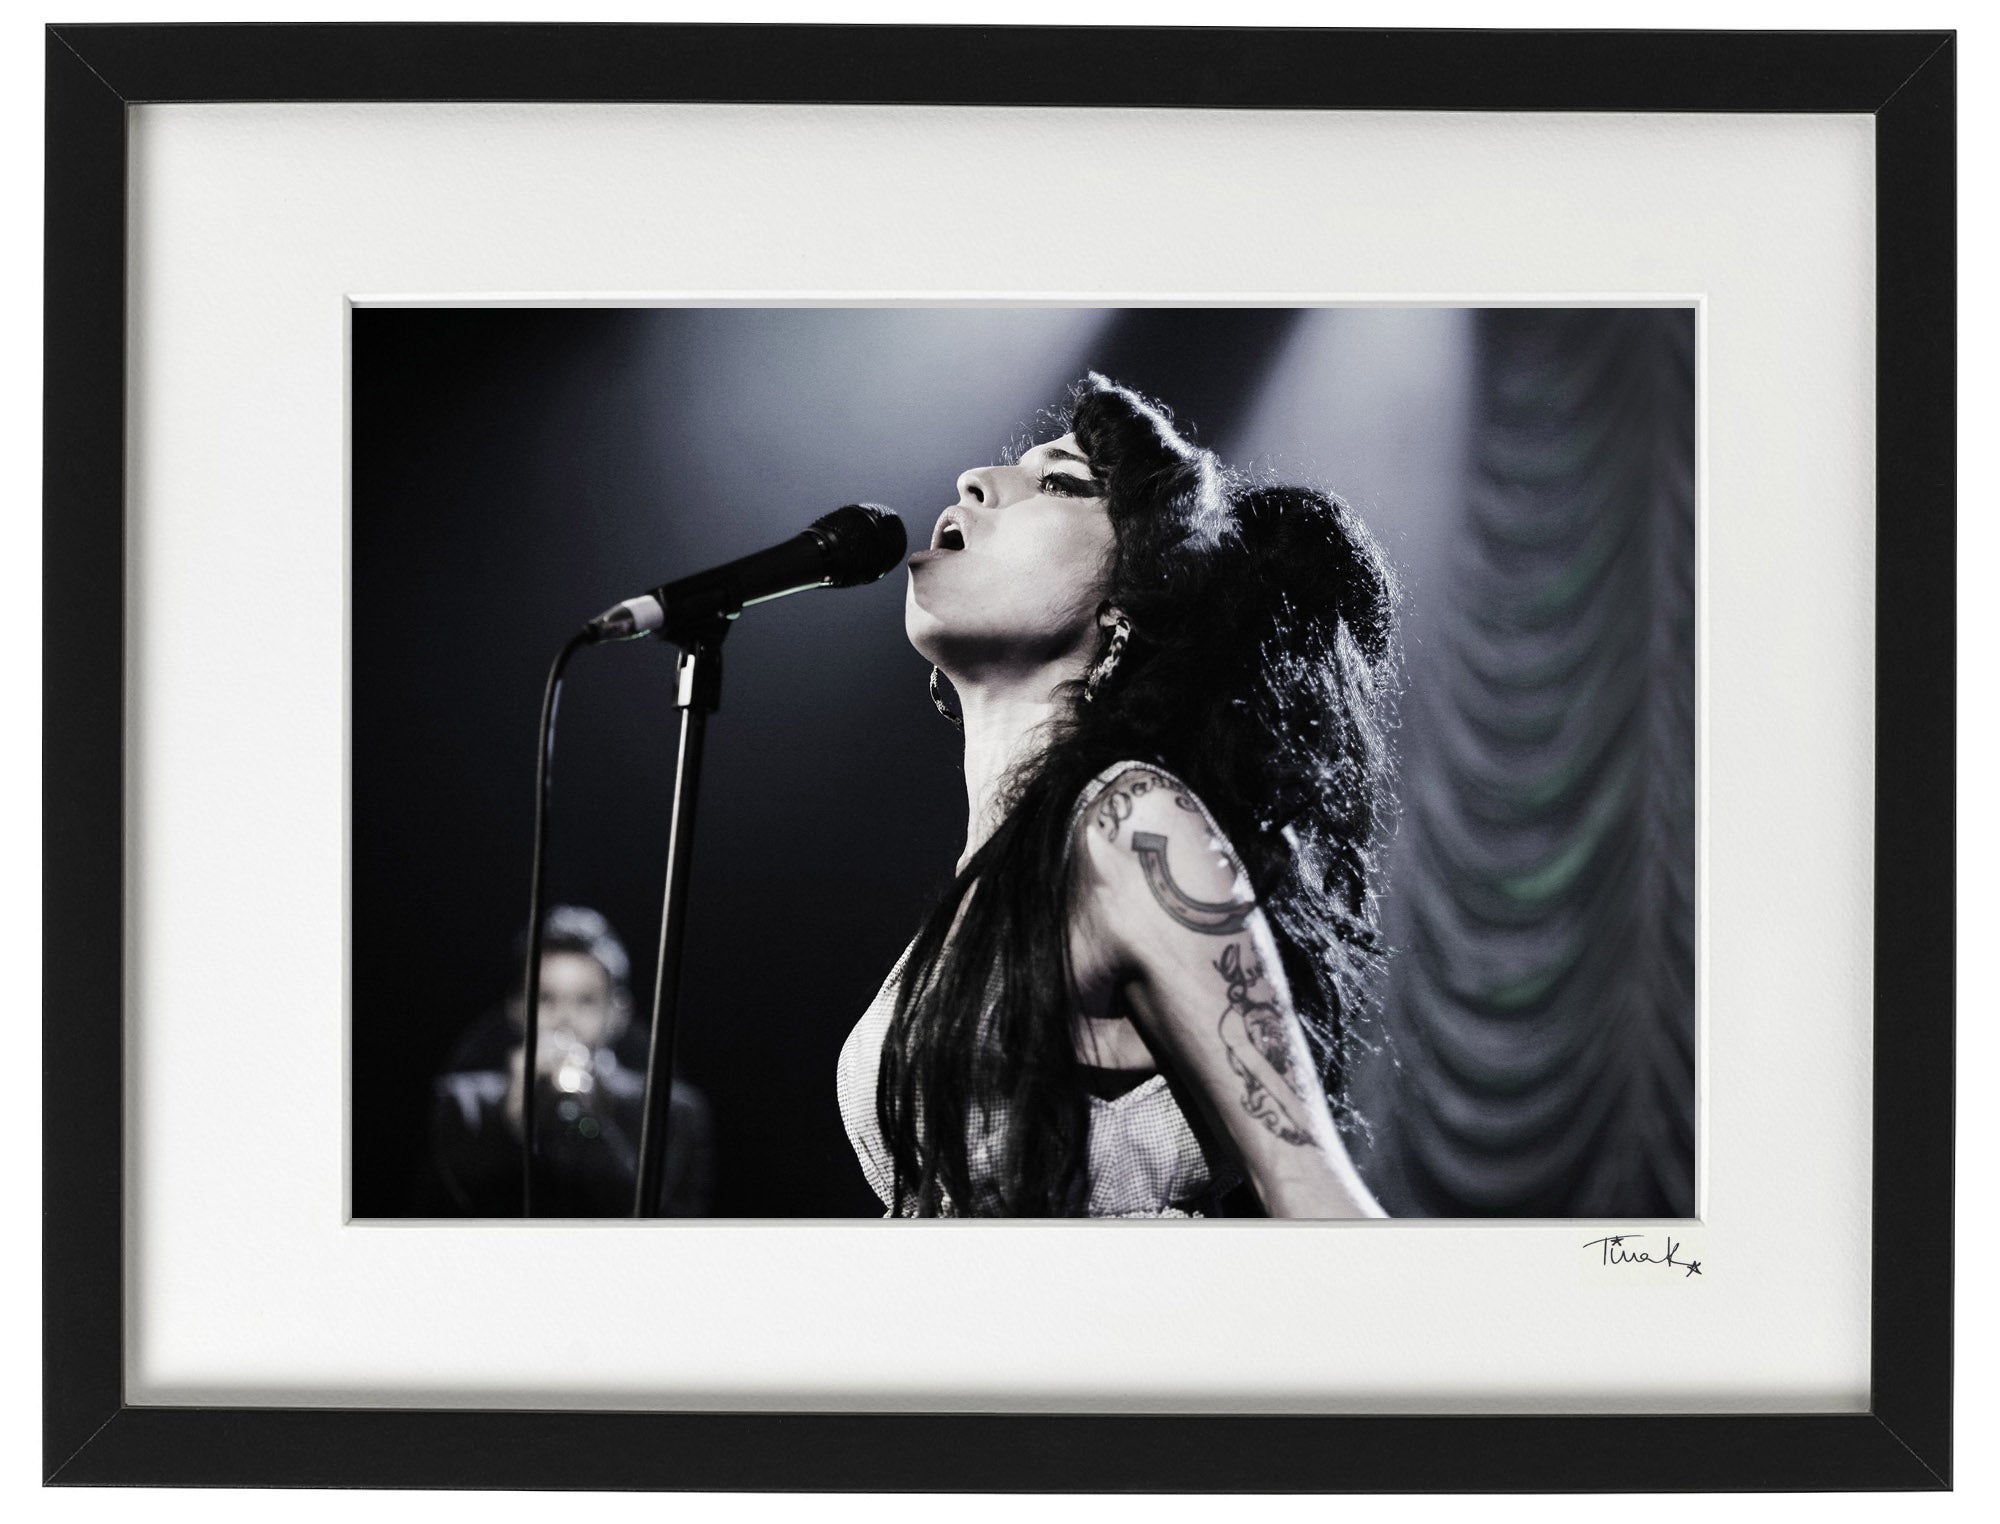 Framed print of Amy Winehouse on stage during her Back to Black Tour, photo by rock photographer Tina K